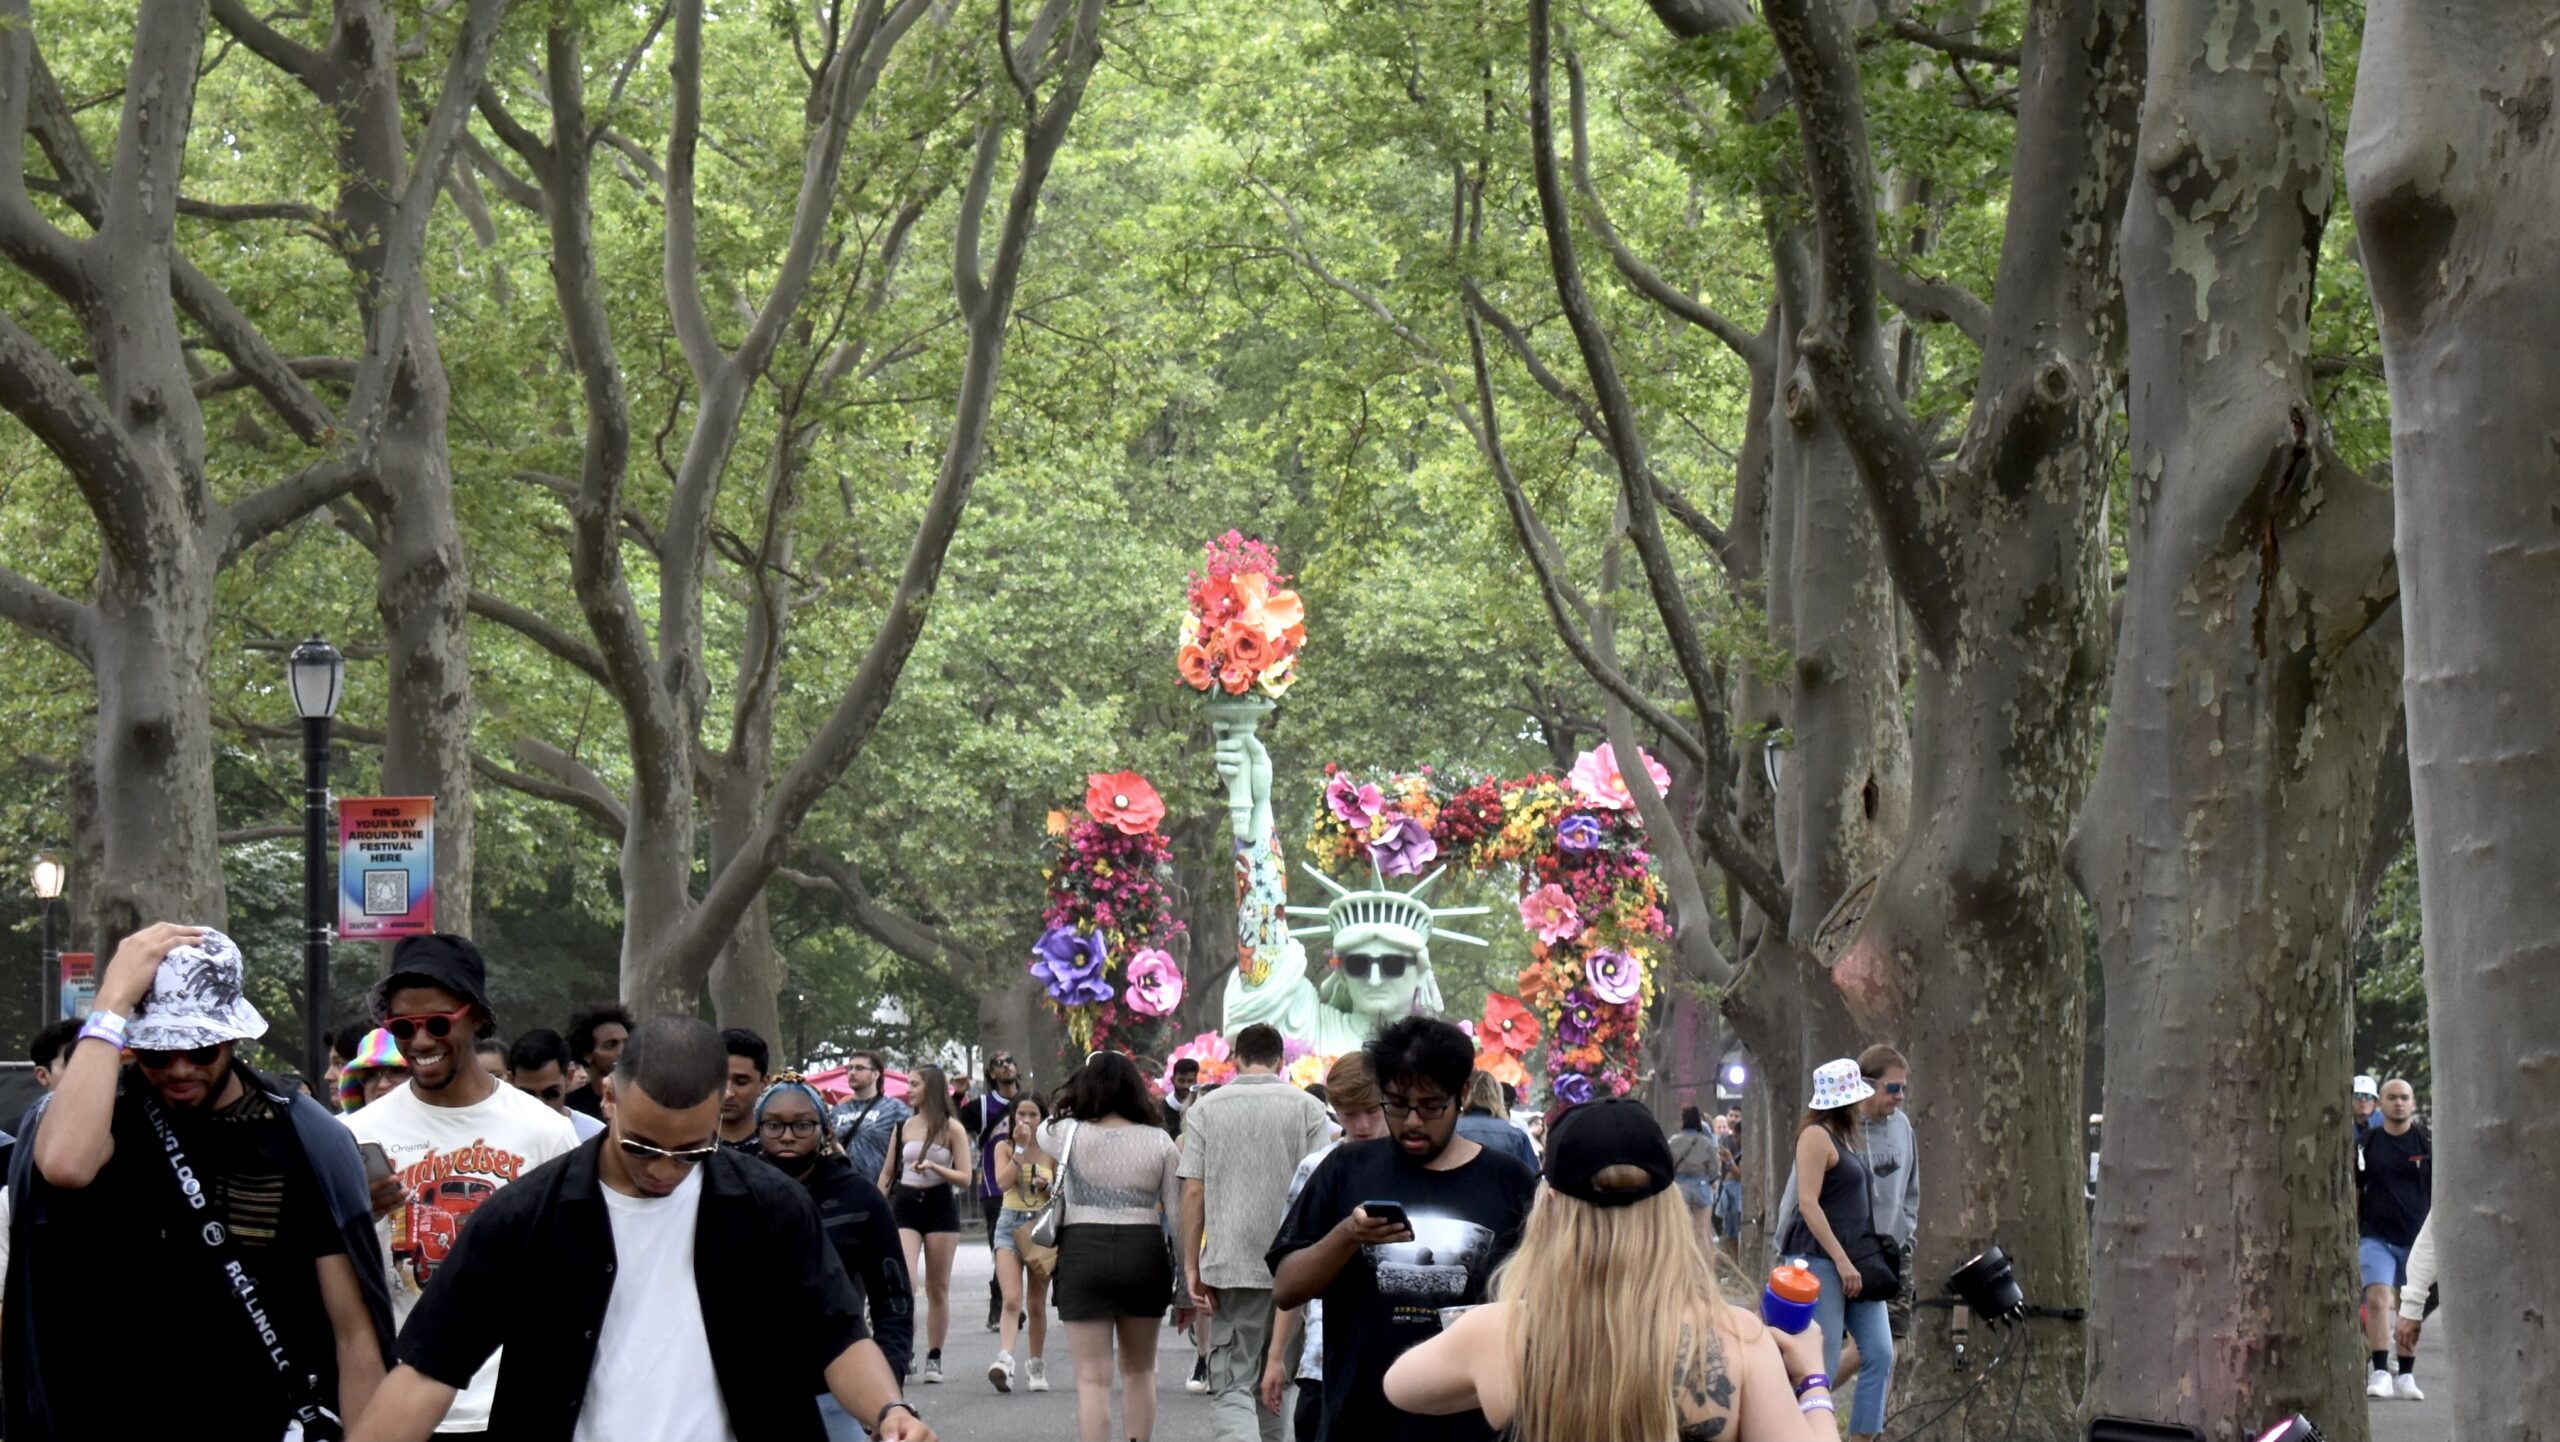 Concert goers walk around a sculpture of the statue of liberty wearing sunglasses, holding a torch of flowers, and surrounded by a flower arch.